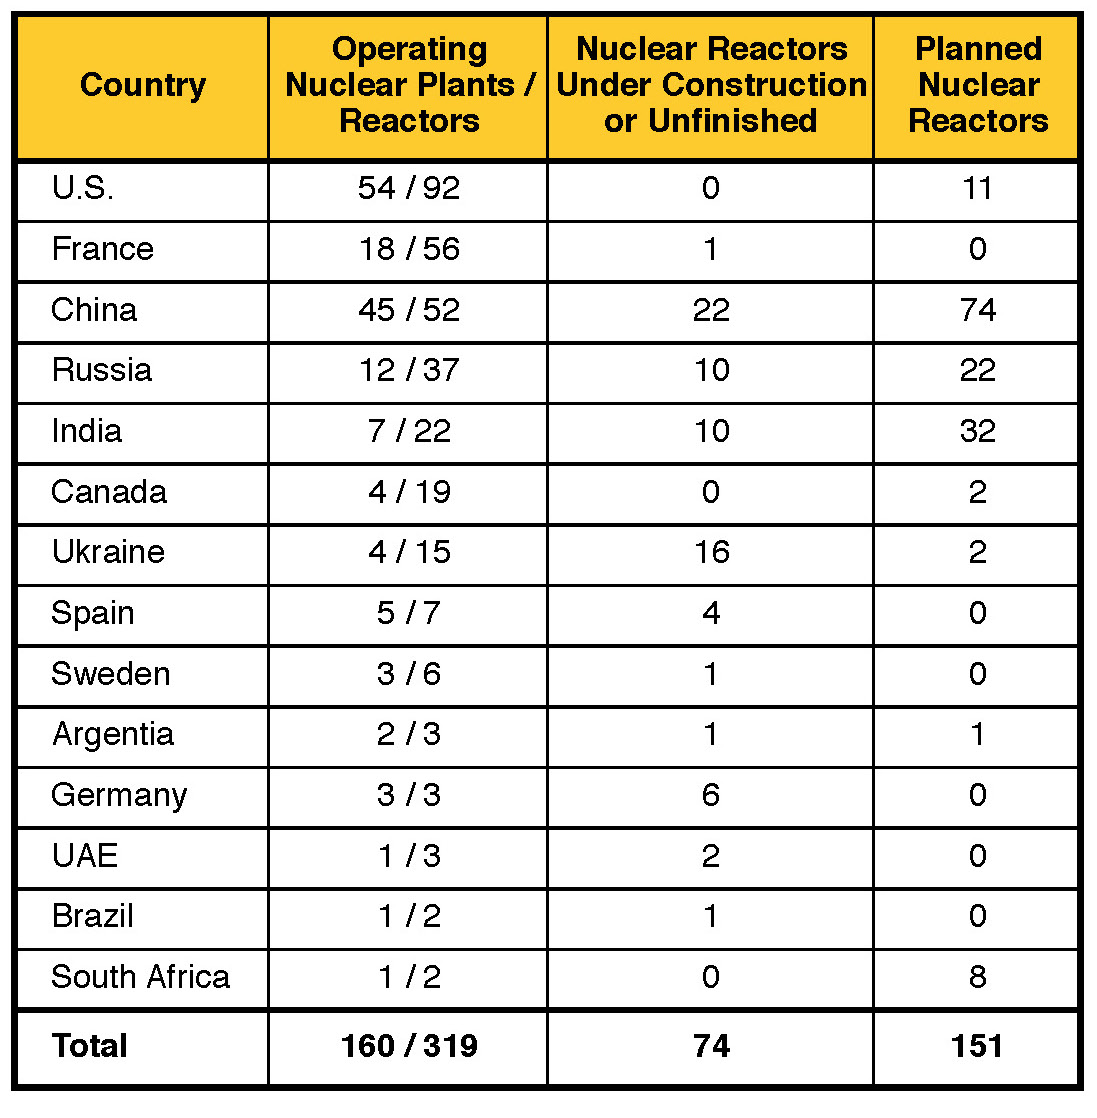 Table V. Civilian nuclear reactors in countries with aluminum smelters. (Data compiled from the World Nuclear Association.)